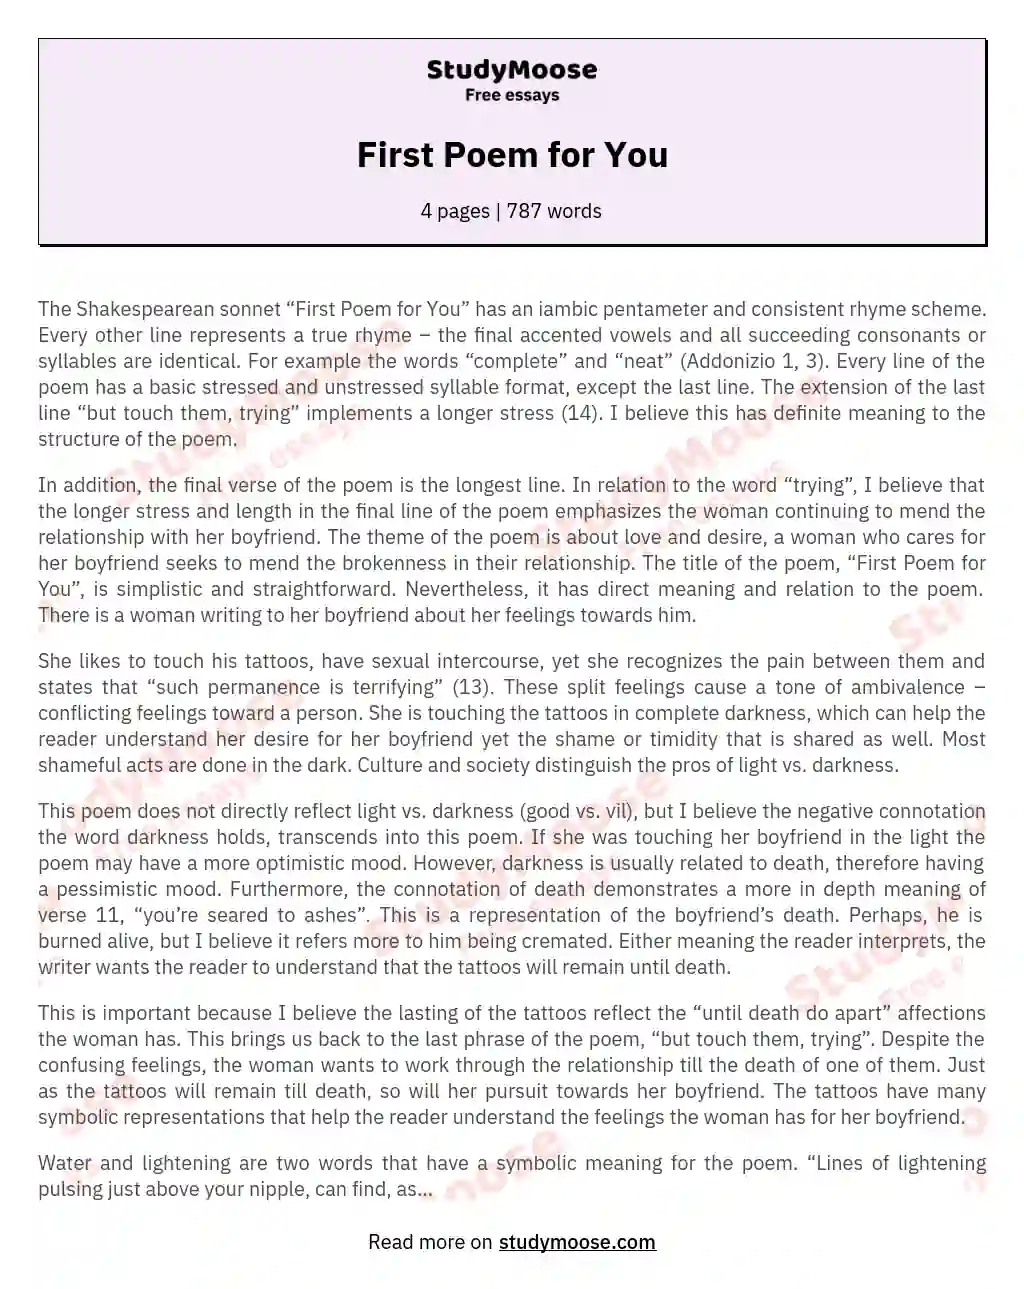 First Poem for You essay